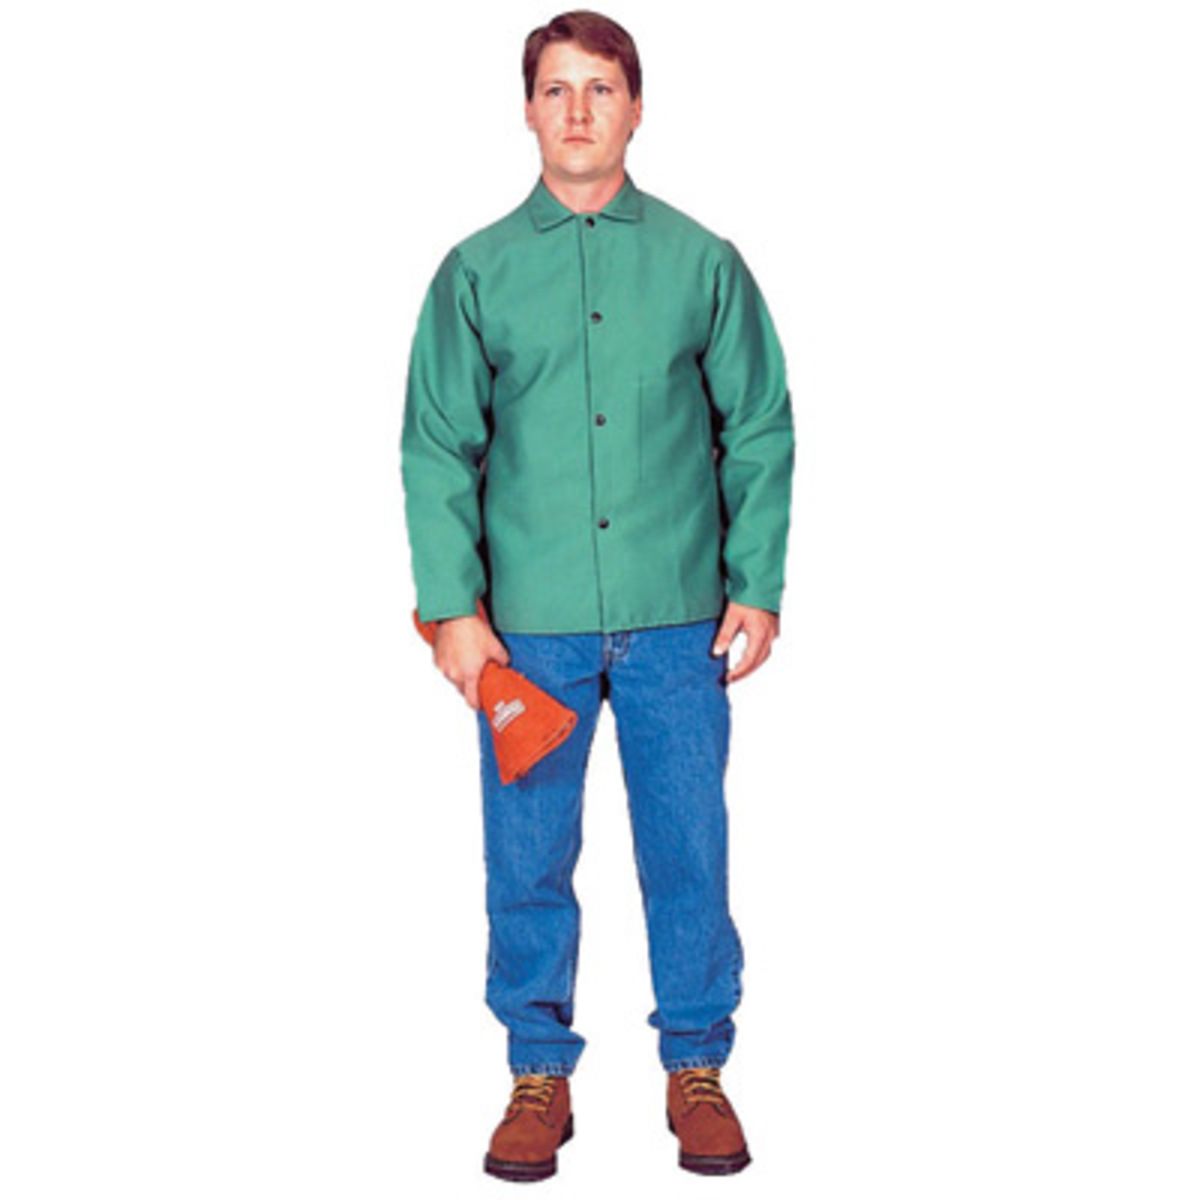 Stanco Safety Products™ Small Green Cotton Flame Resistant Welding Jacket With Snap Closure